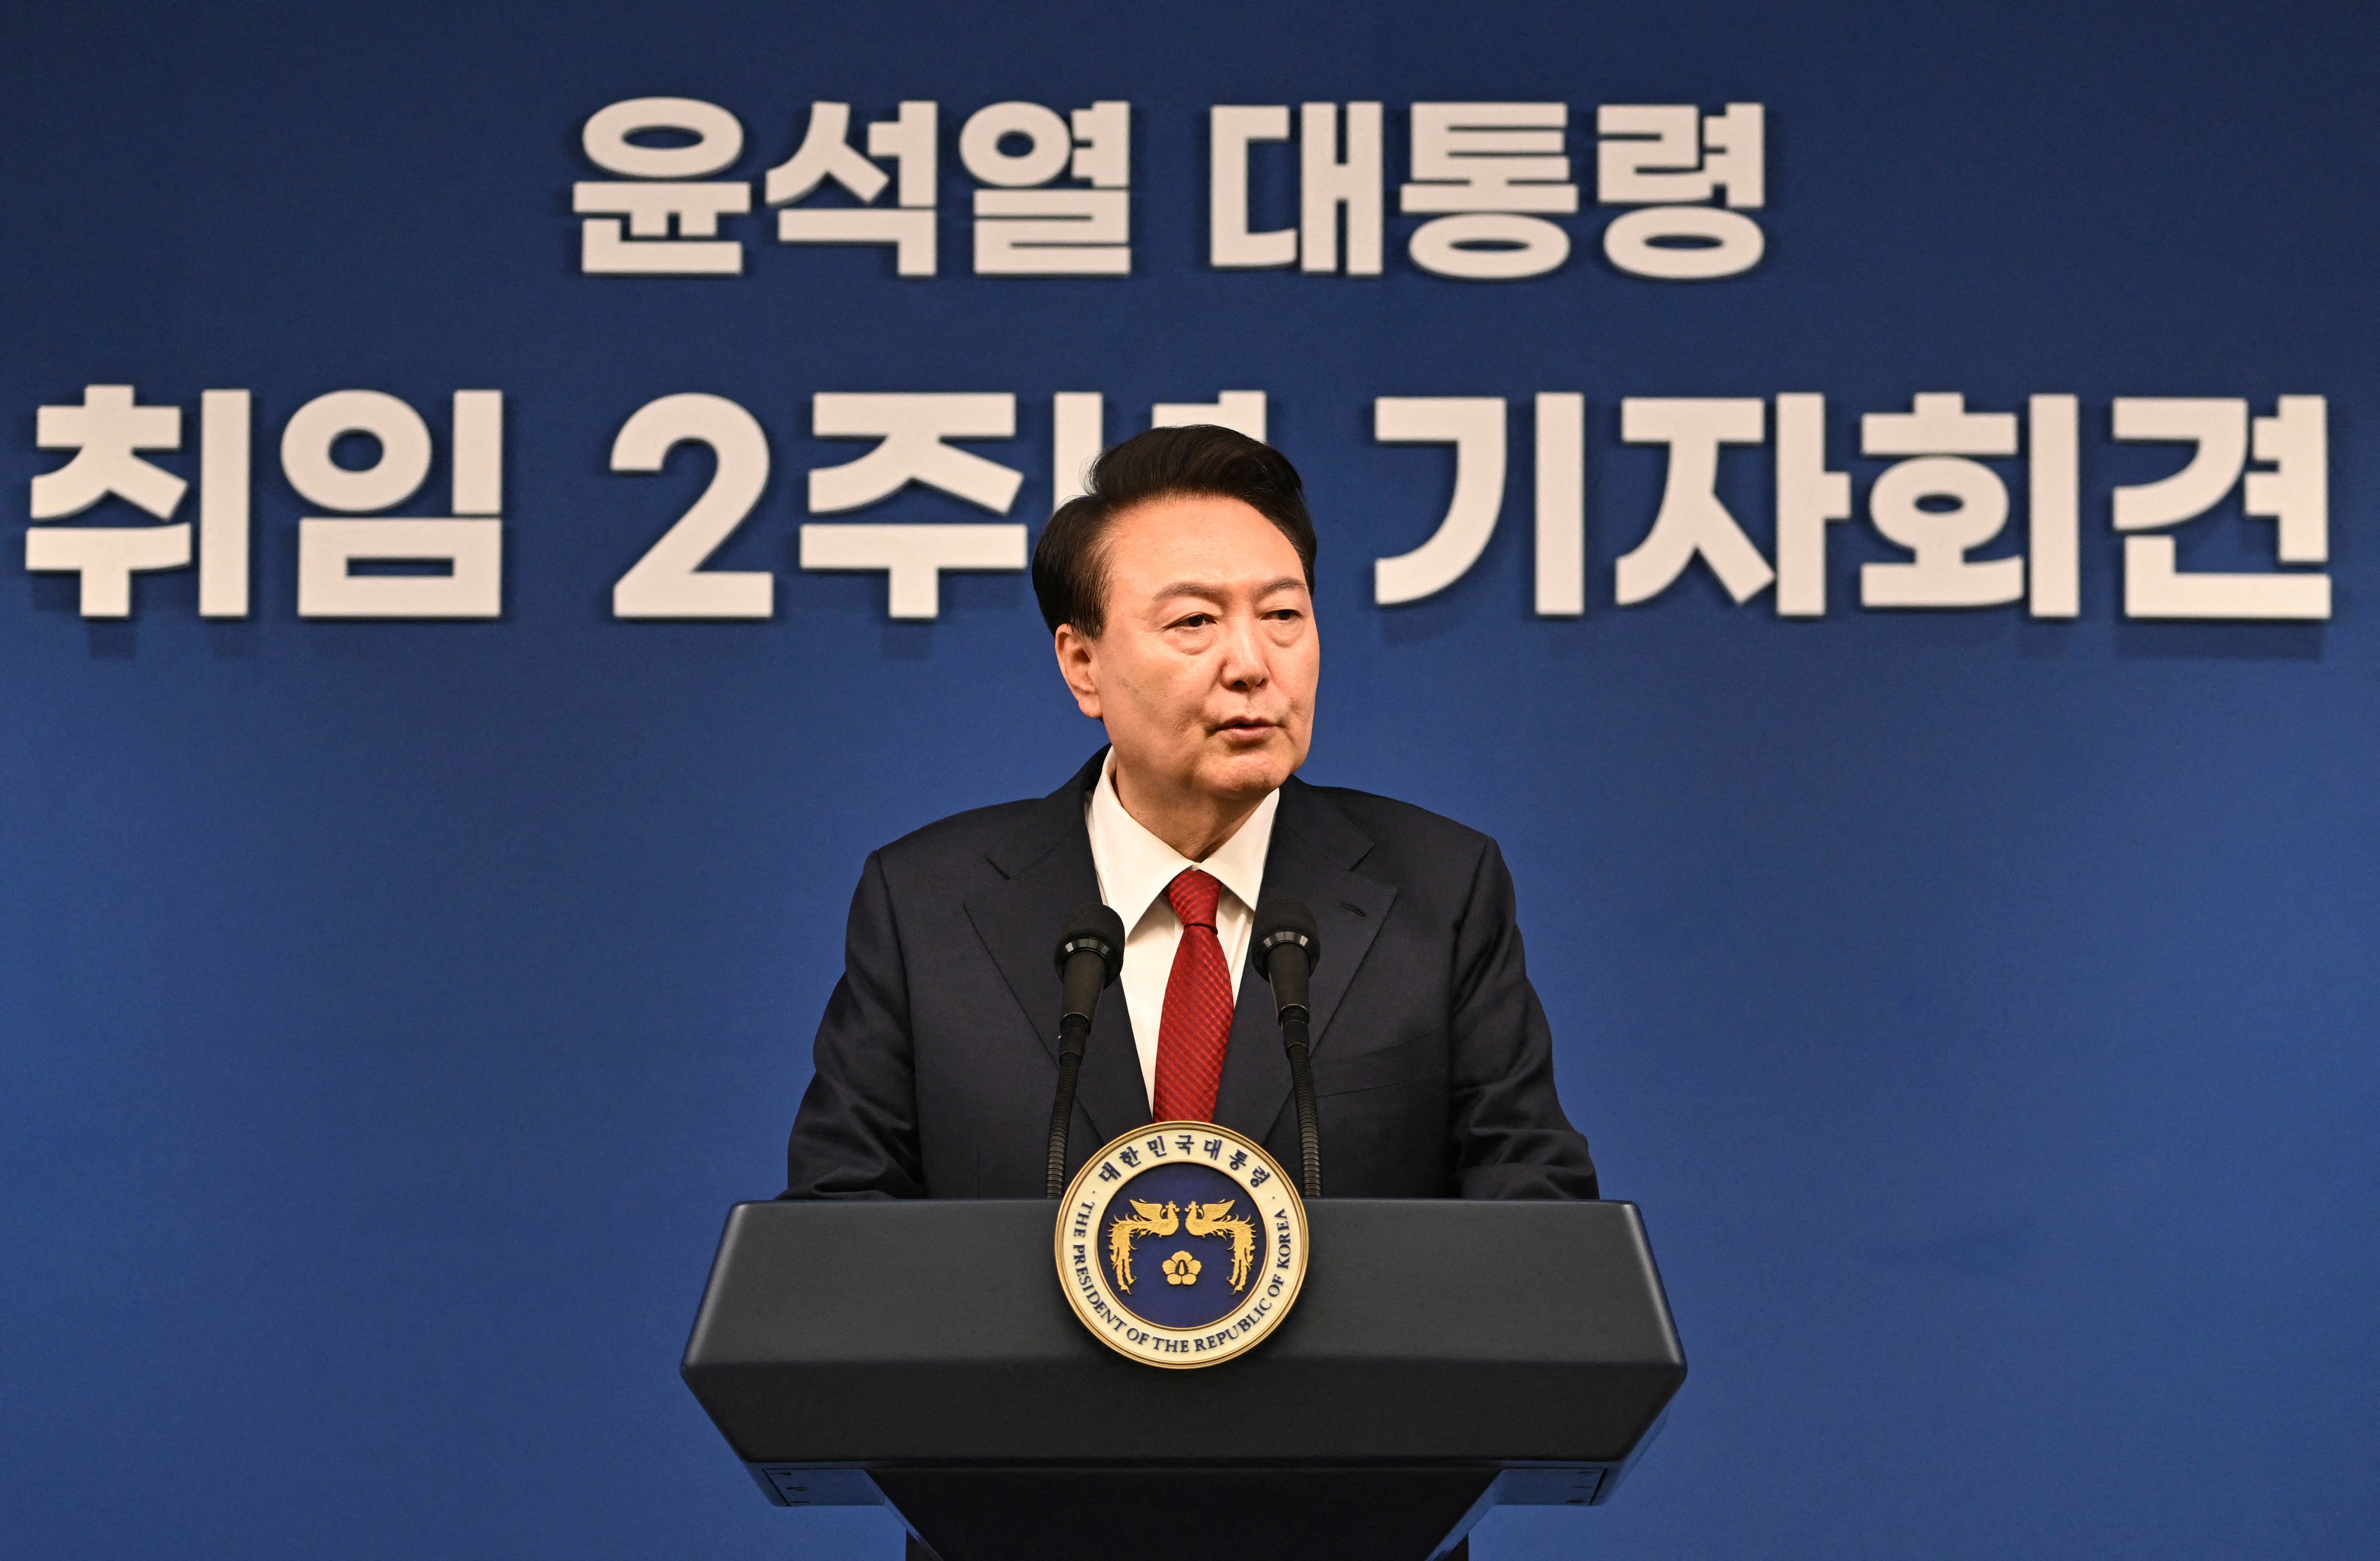 South Korea’s president Yoon Suk Yeol speaks during a press conference marking two years in office at the presidential office in Seoul